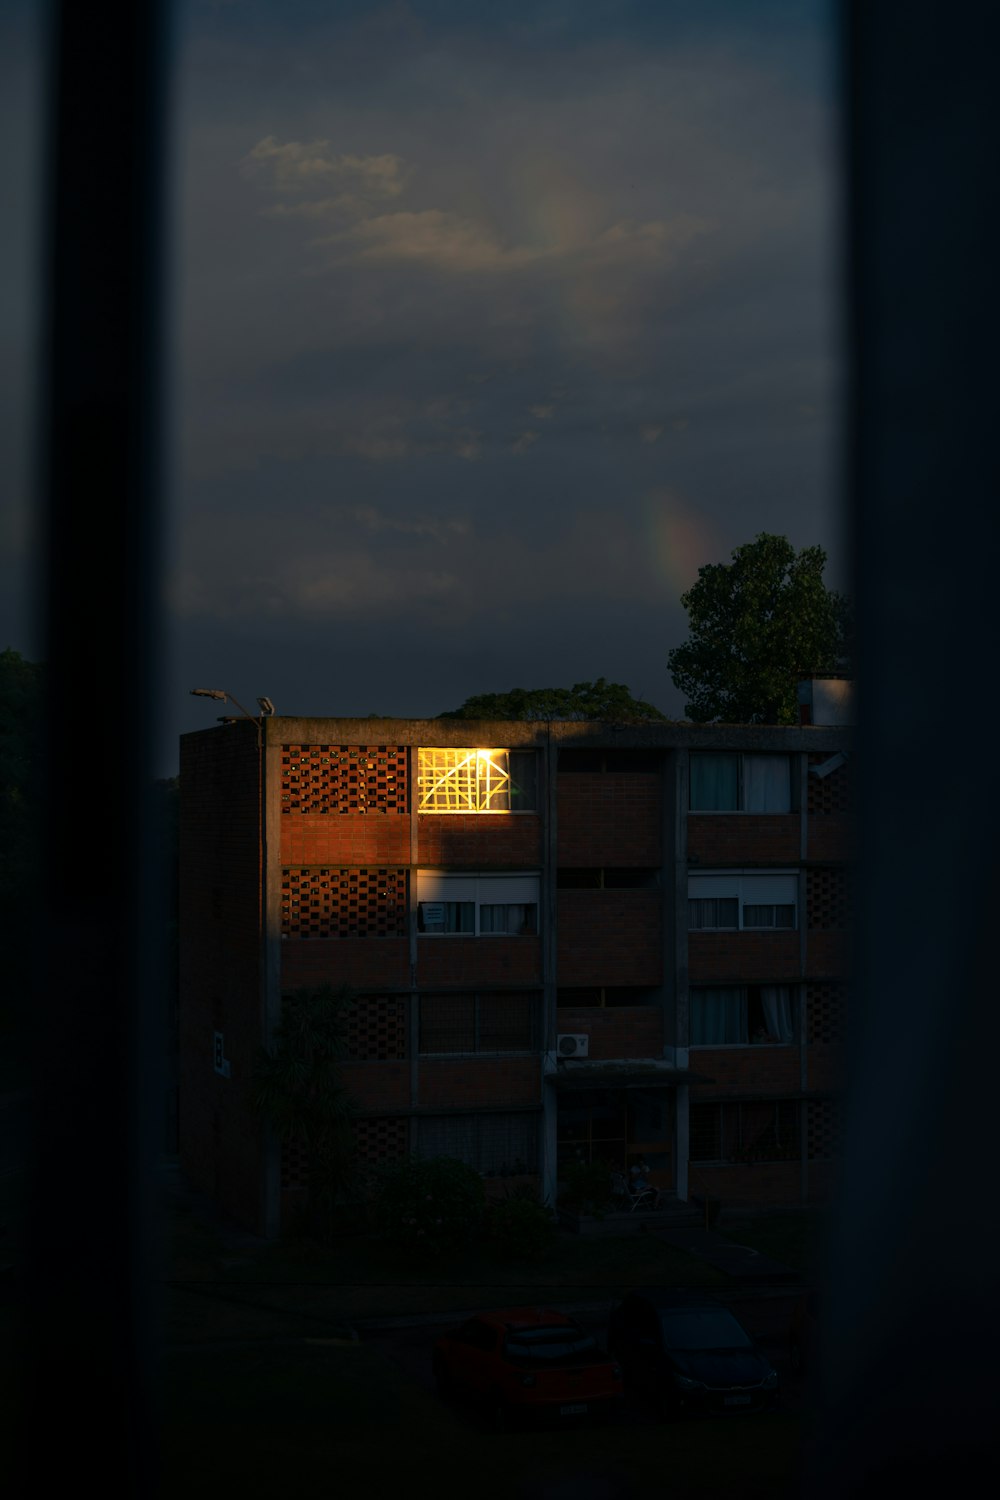 a view of a building through a window at night